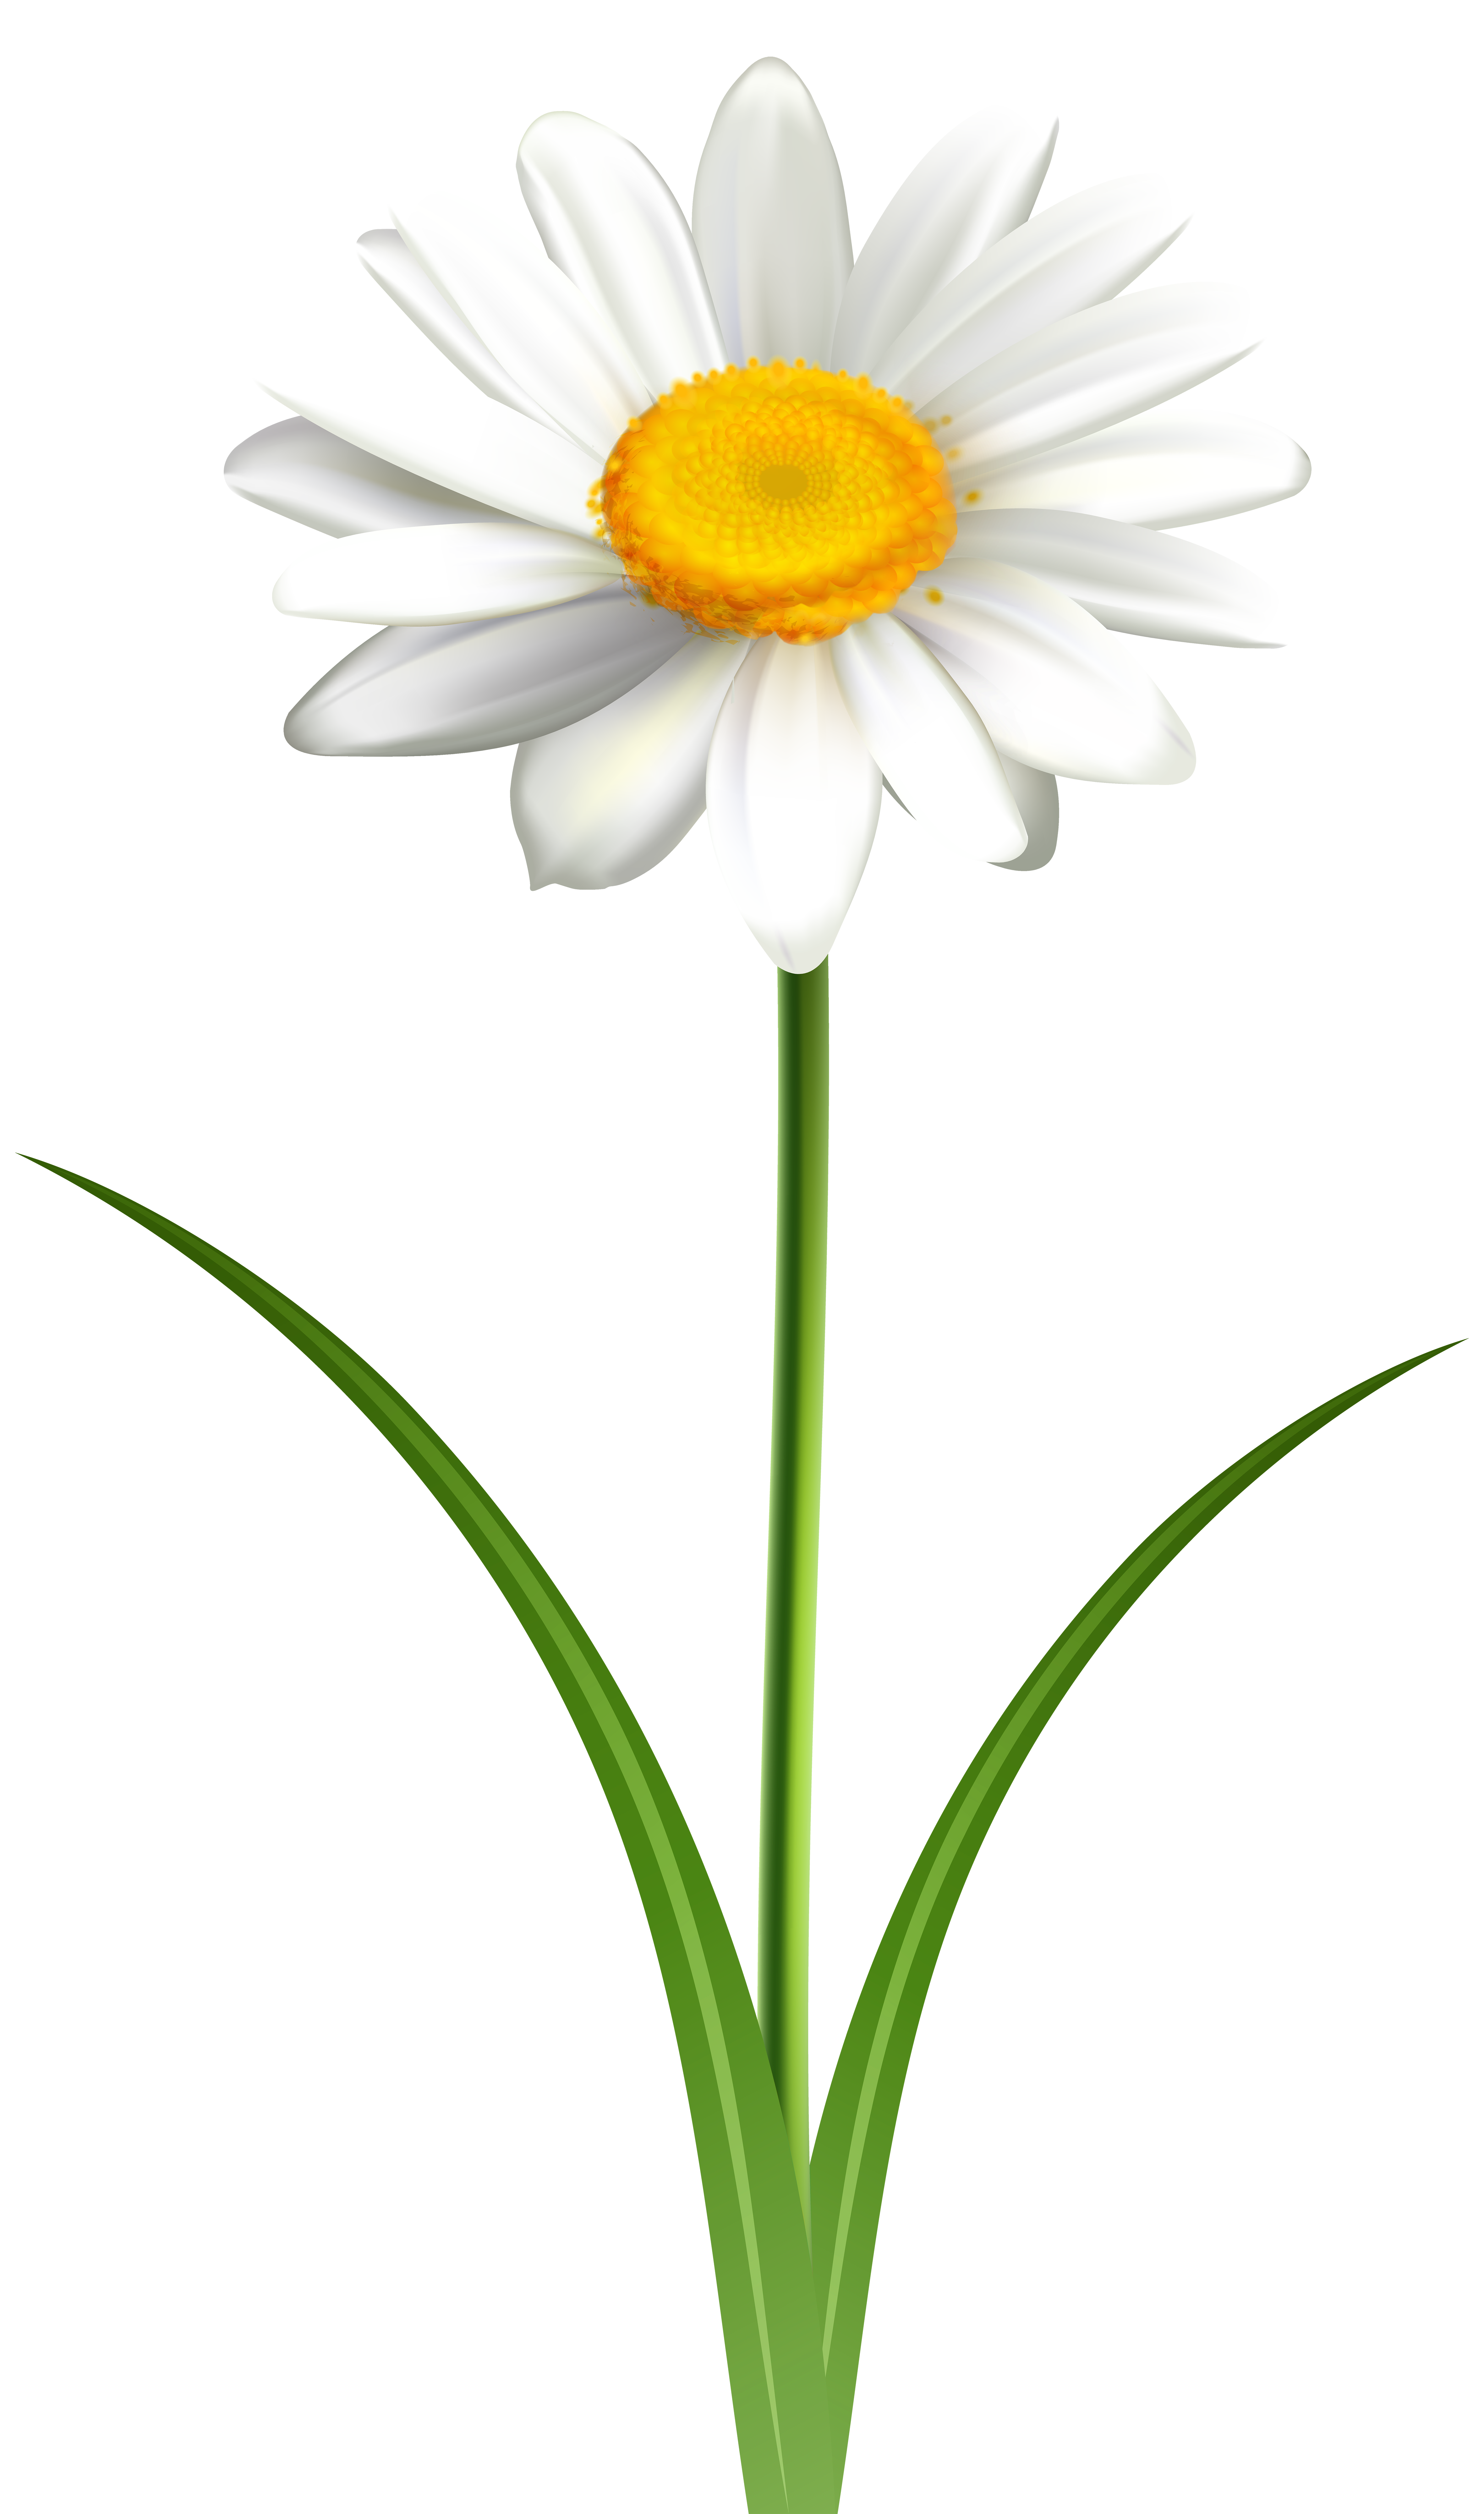 Free Daisy Flower Clipart Download Free Clip Art Free Clip Art On Clipart Library